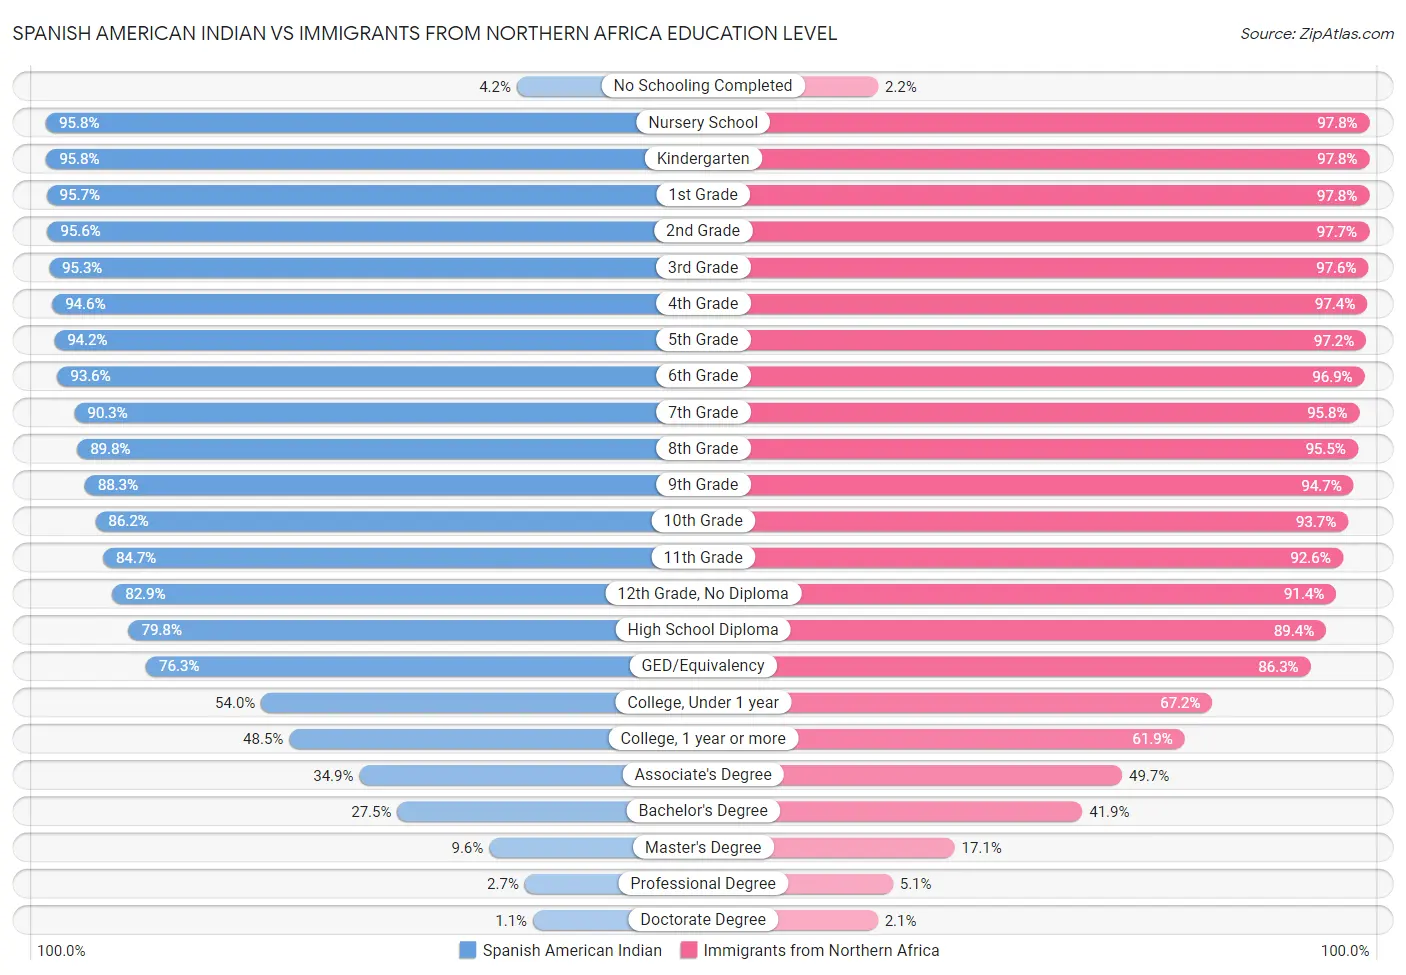 Spanish American Indian vs Immigrants from Northern Africa Education Level